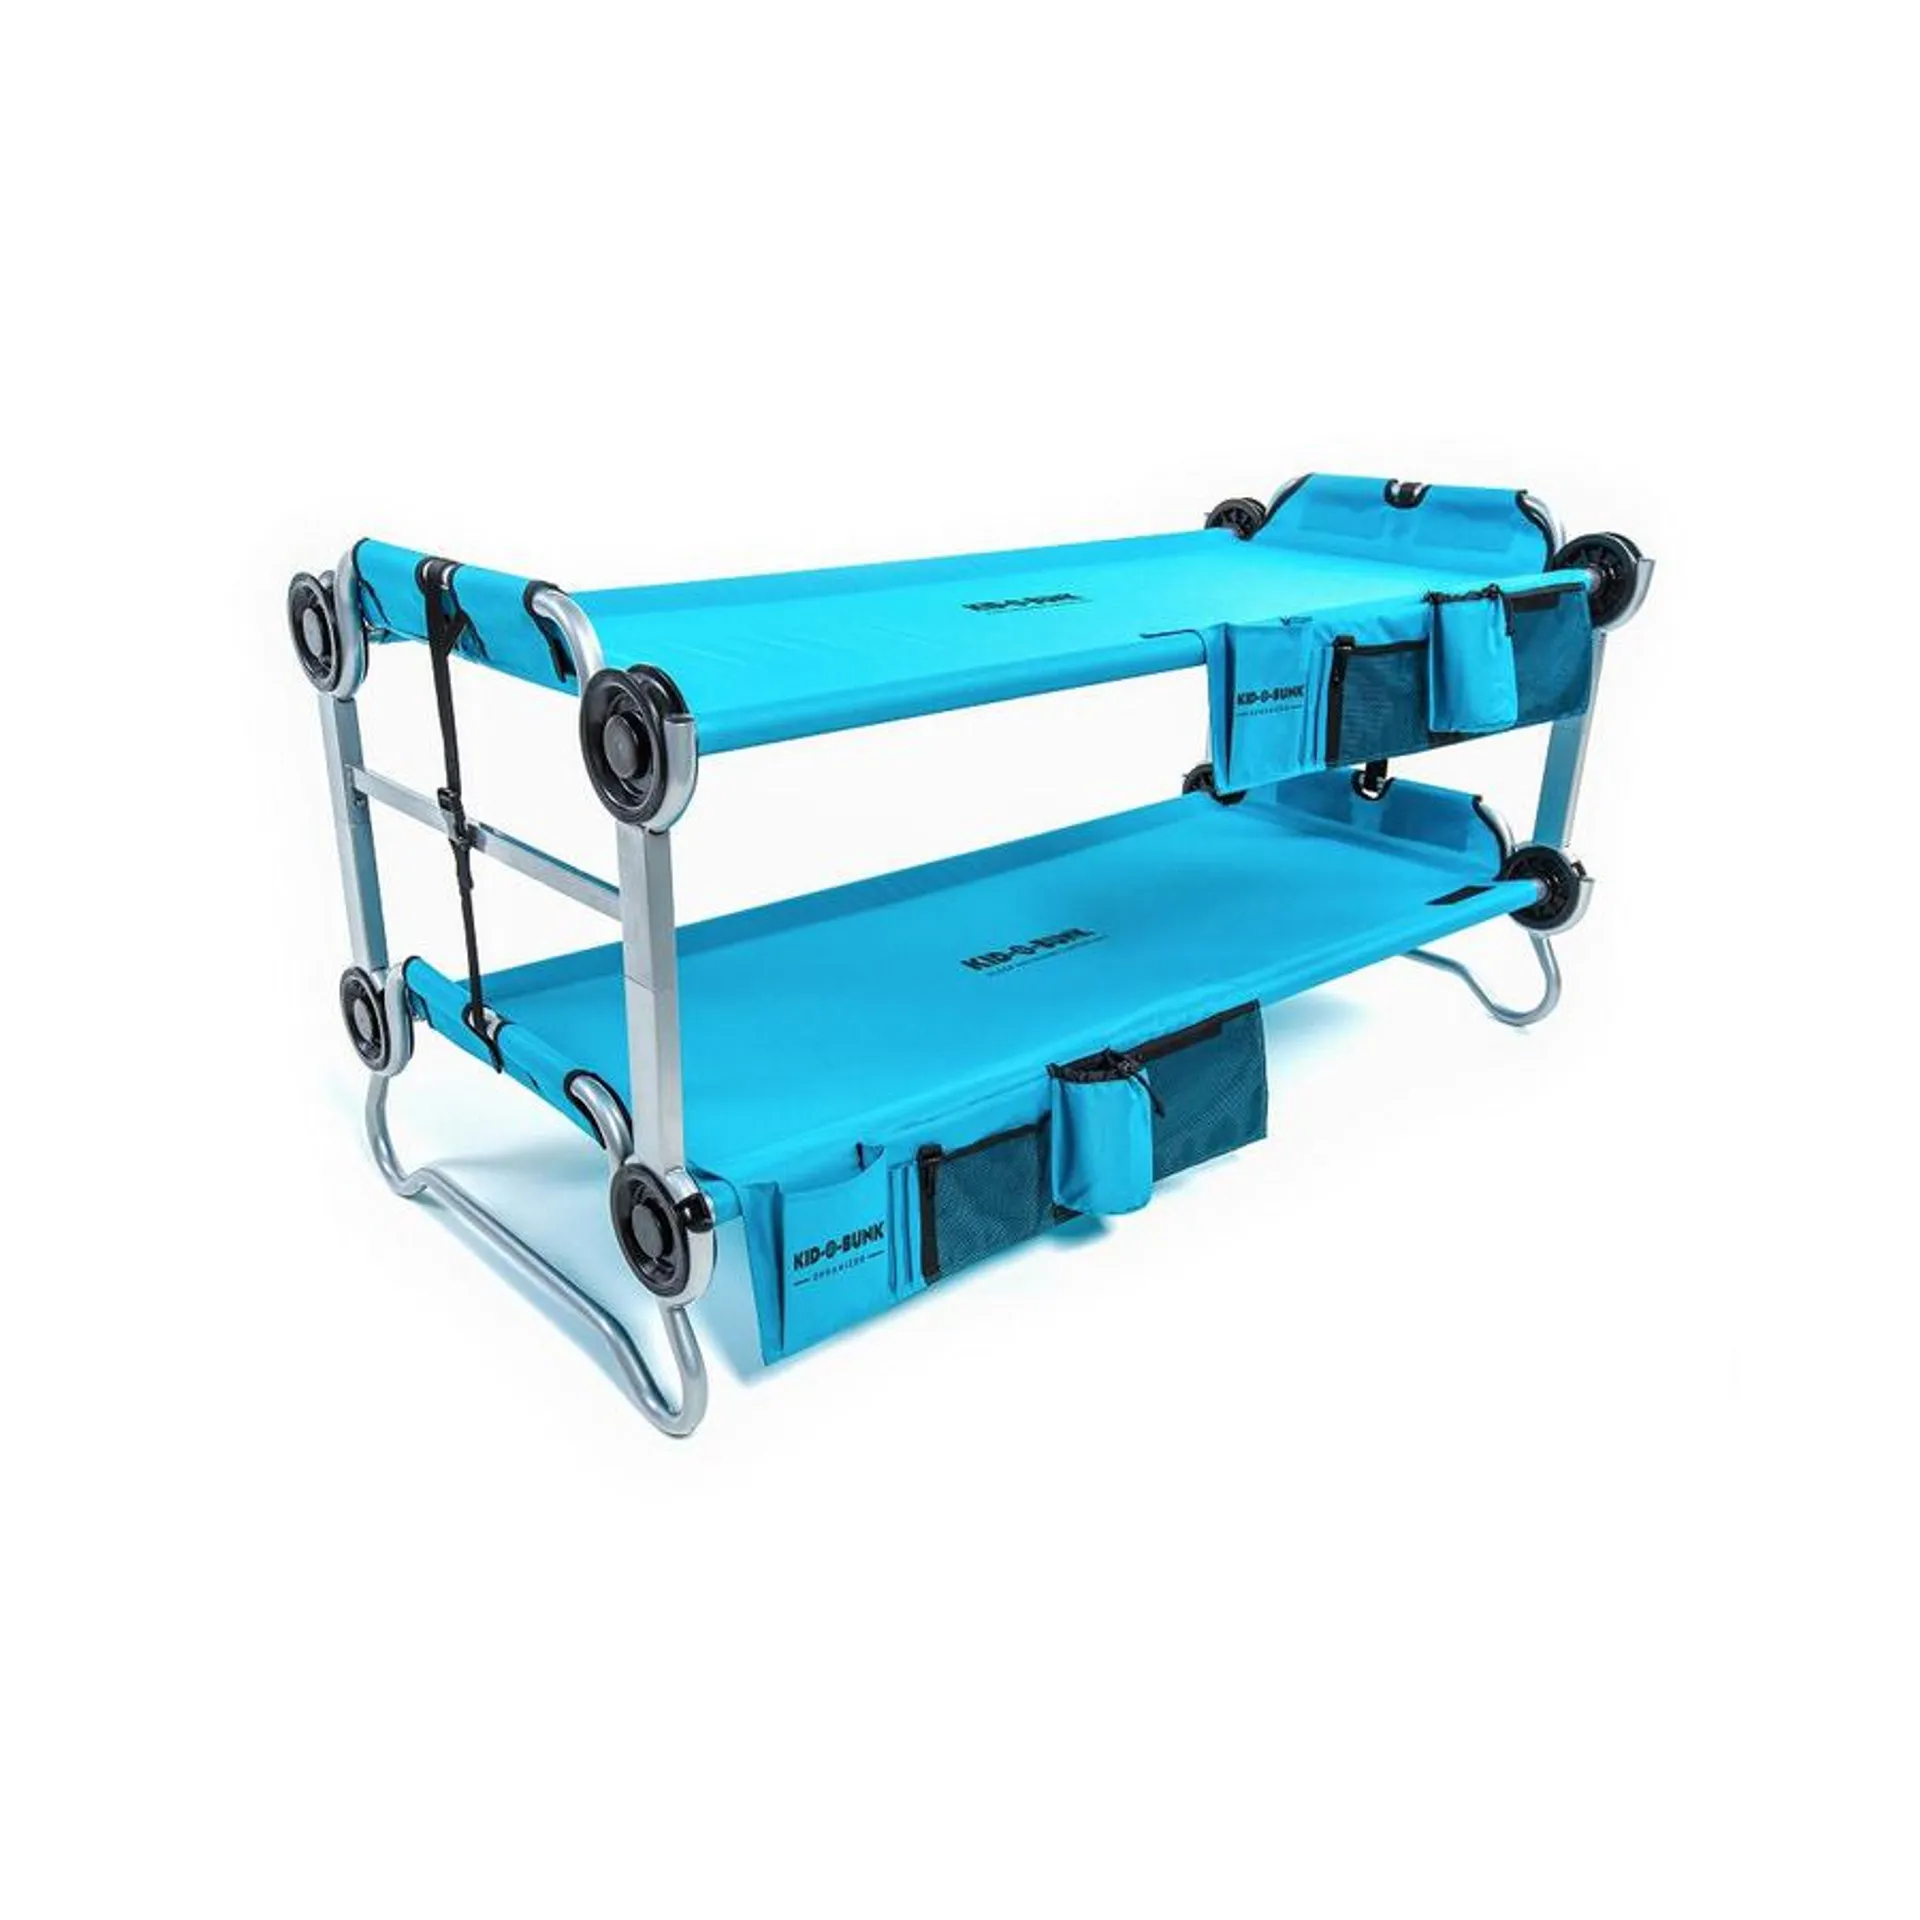 Disc-O-Bed Kid-O-Bunk With 2 Organizers Teal